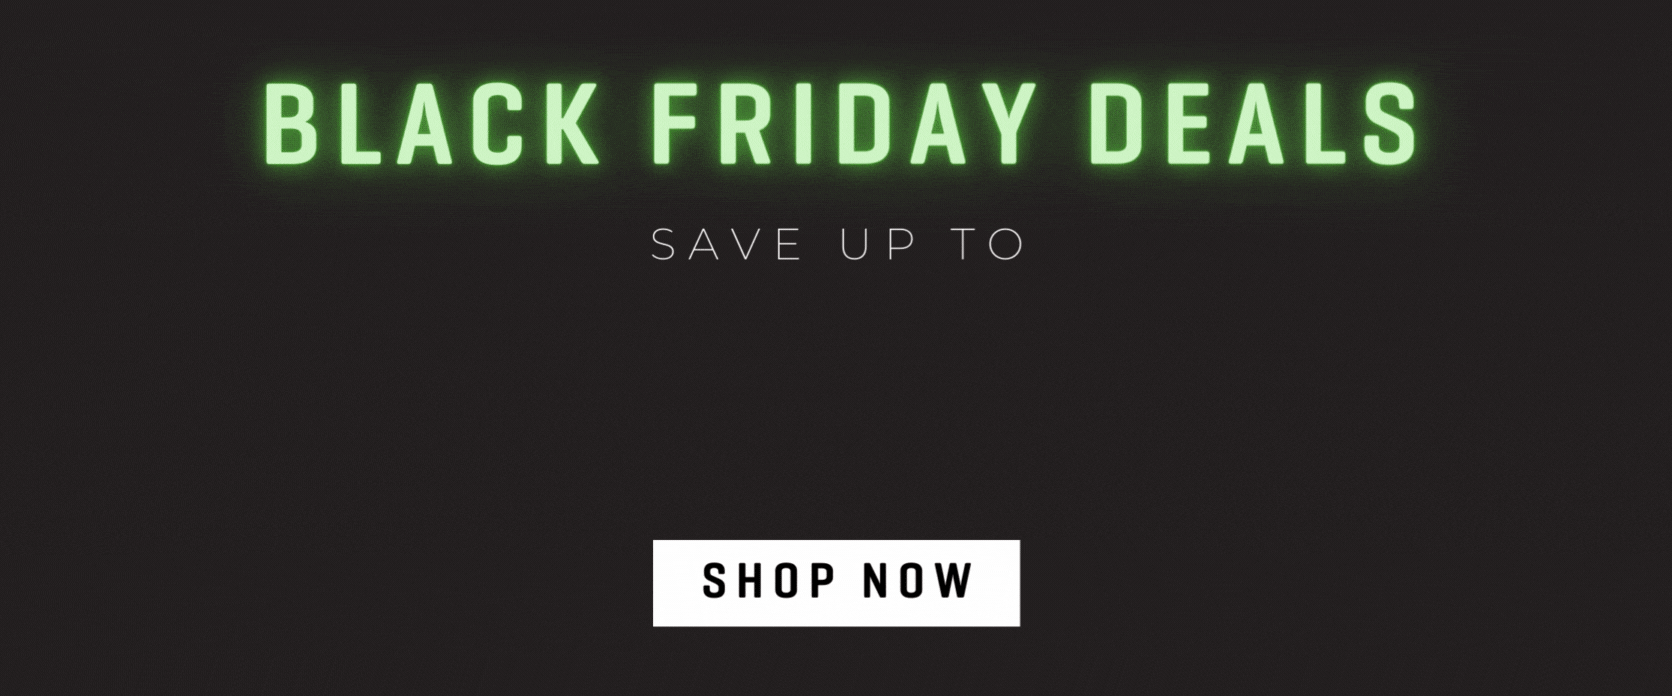 Black Friday deals up to 70% off